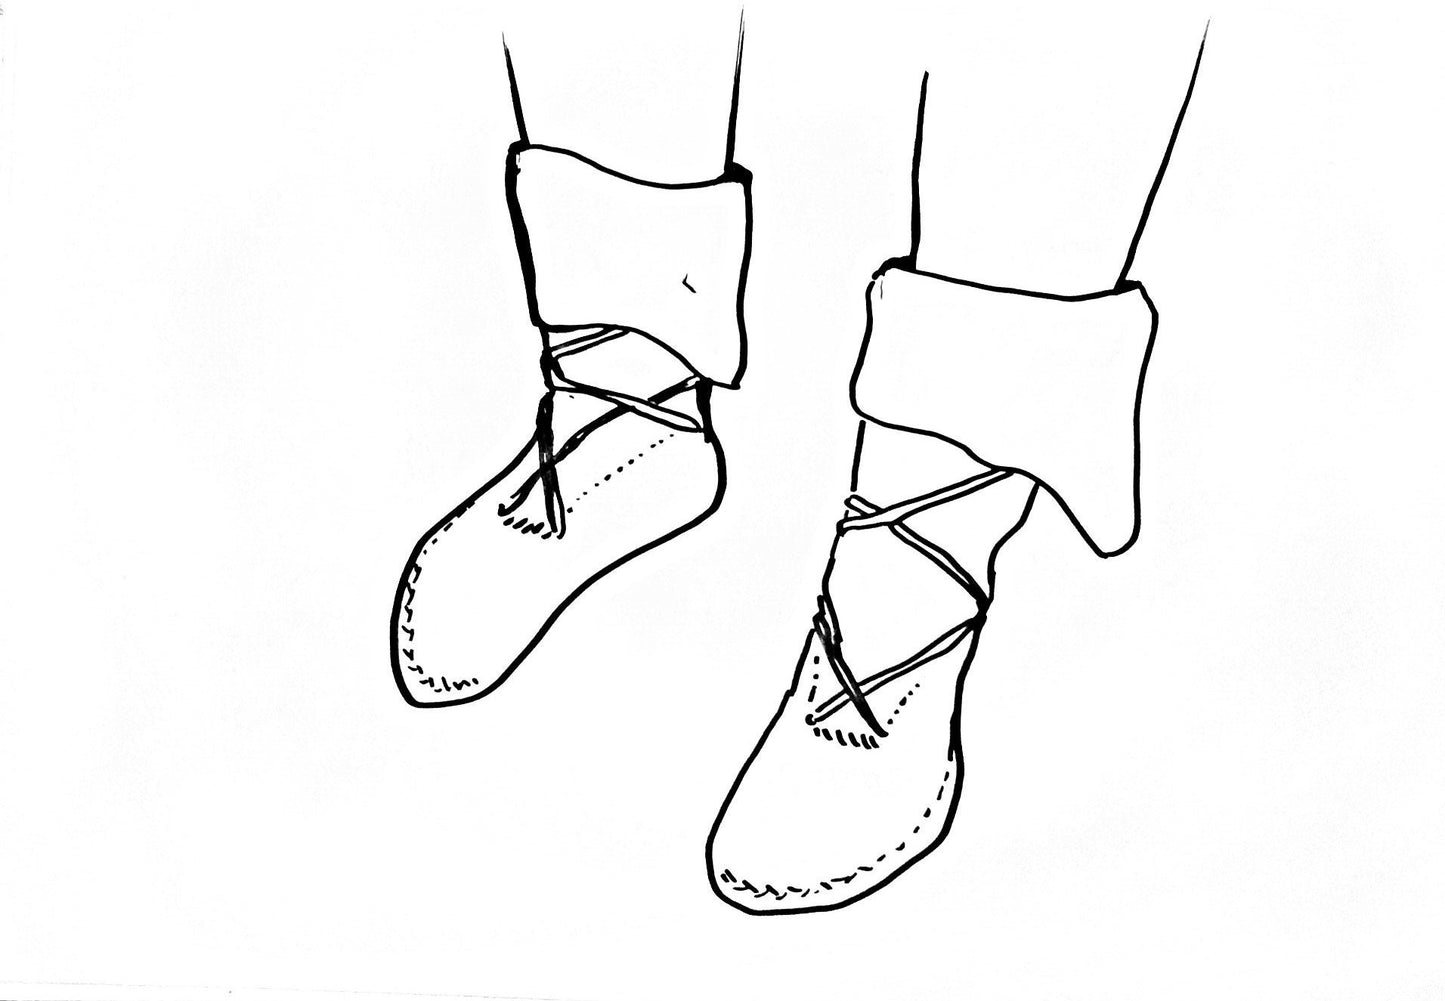 Barefoot-Boots With Laces - 3 Height Options: Ankle Boots / Low Boots / High Boots Earthingmoccasins